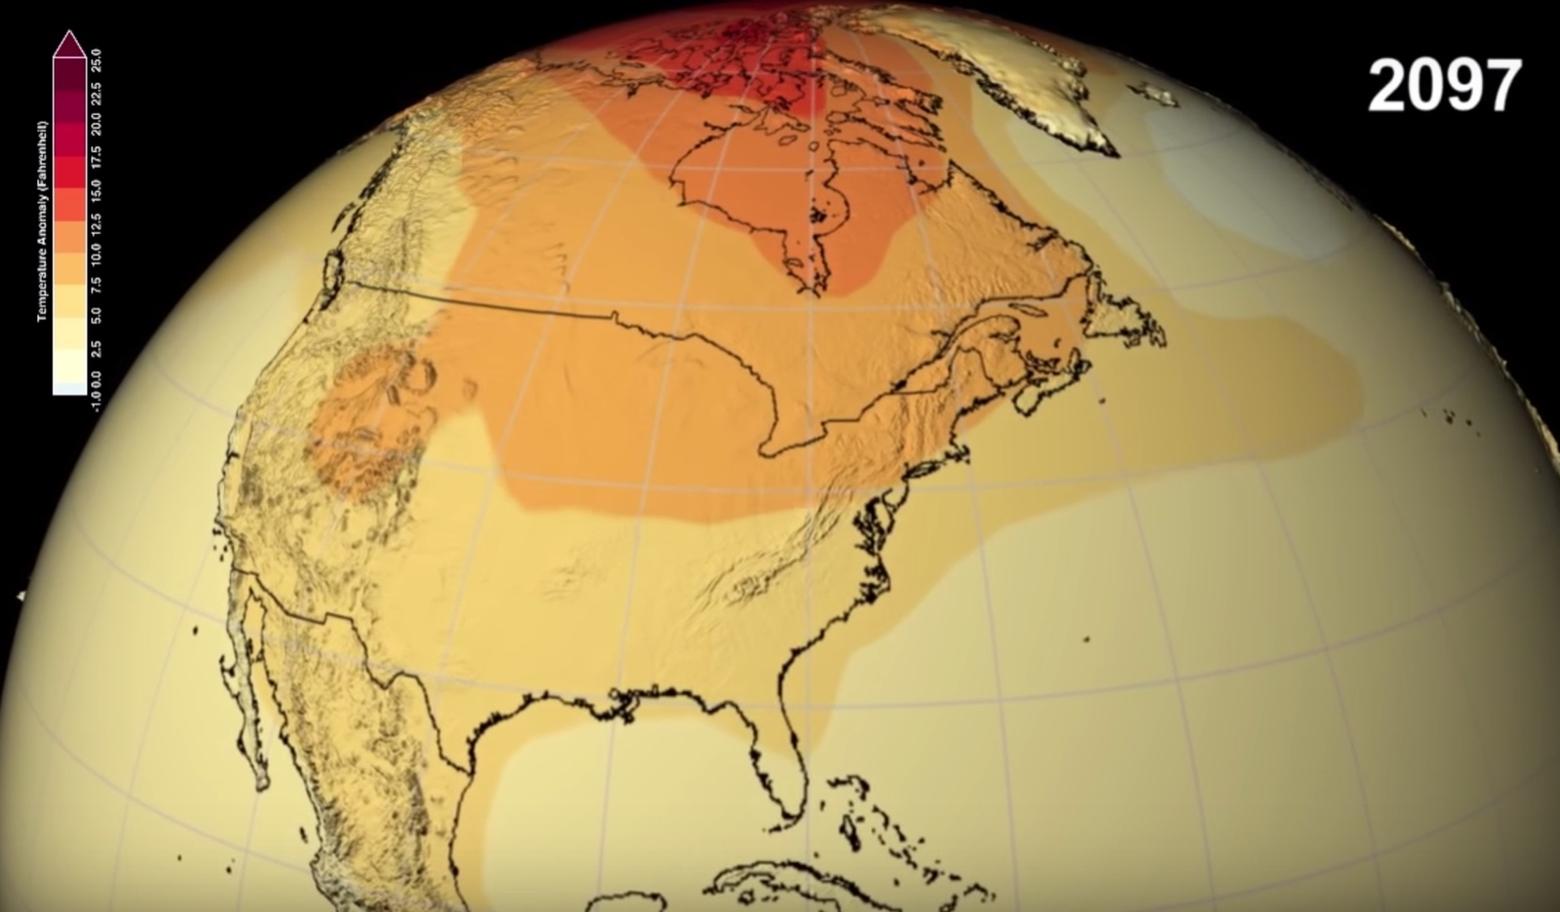 Temperatures are expected to dramatically rise everywhere but the Arctic and midsection of the US, including the Rockies, will experience even hotter conditions.  Image courtesy NASA . Check out videos at end of Olsen's analysis.